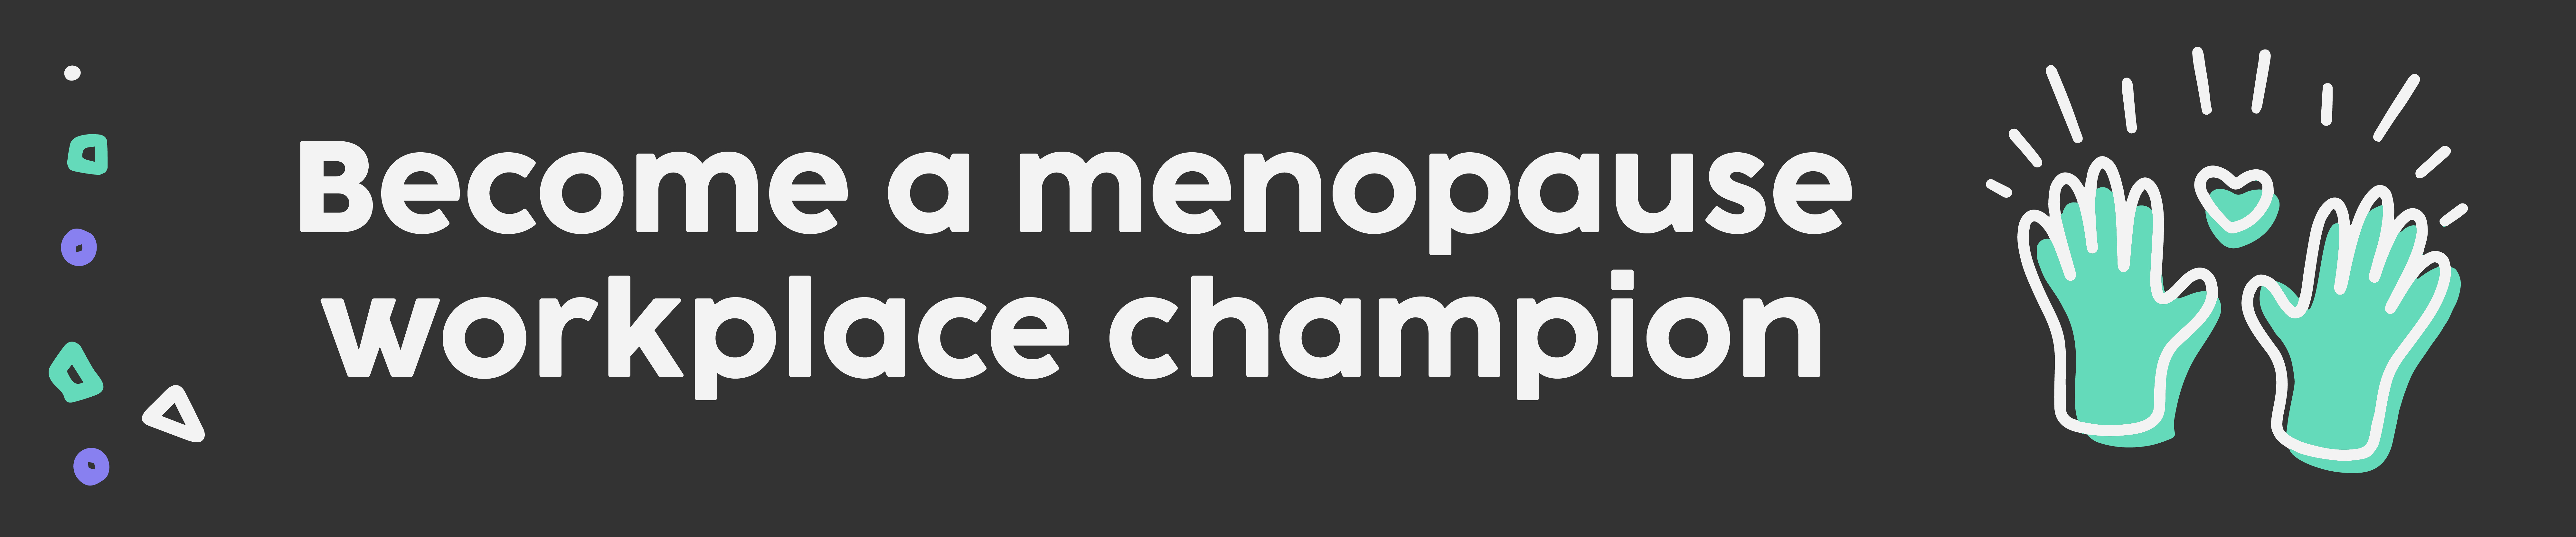 become a menopause awareness champion at work